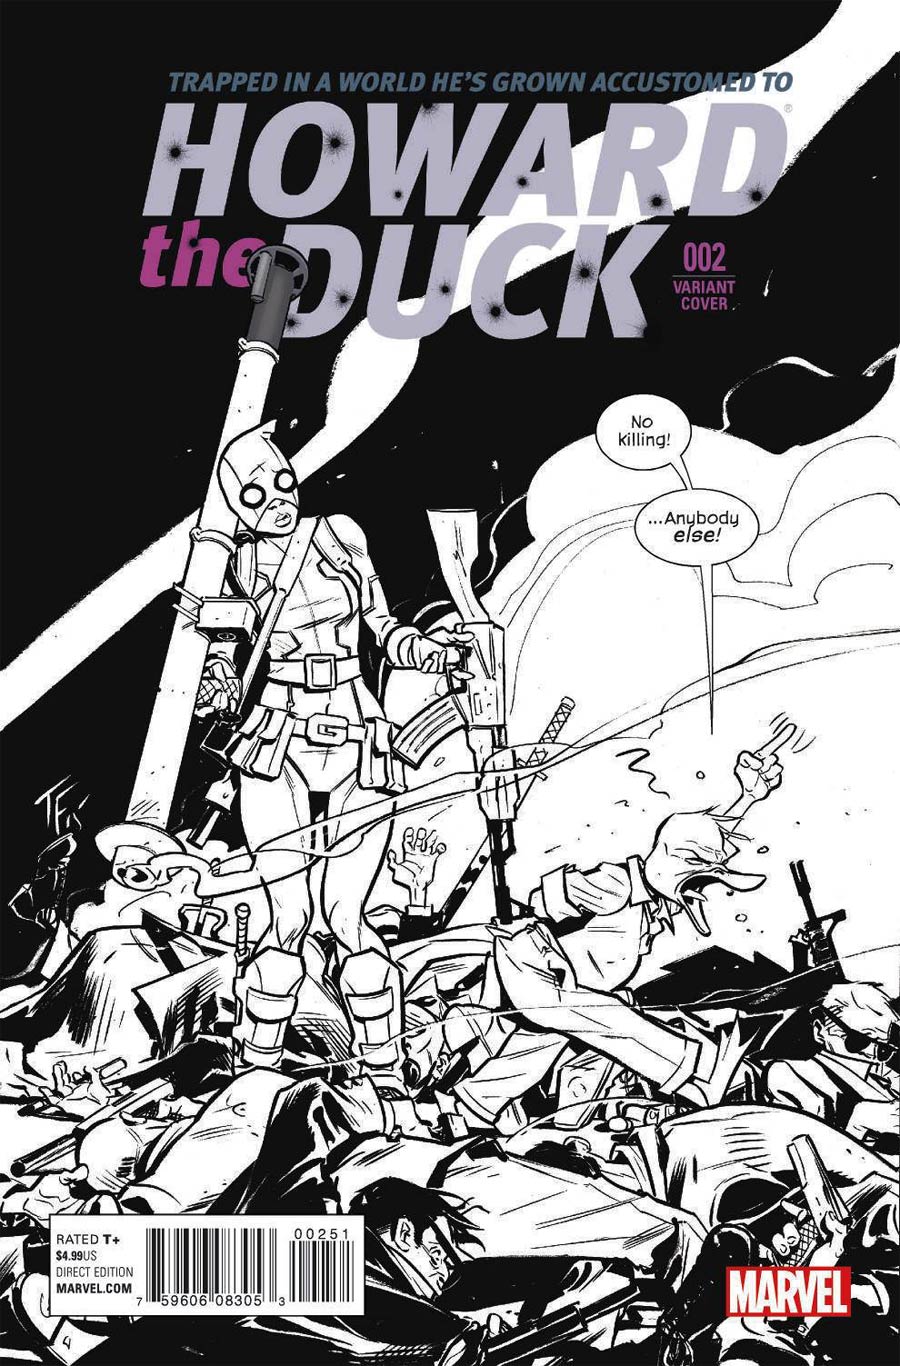 Howard The Duck Vol 5 #2 Cover F 2nd Ptg Tom Fowler Gwenpool Black & White Variant Cover